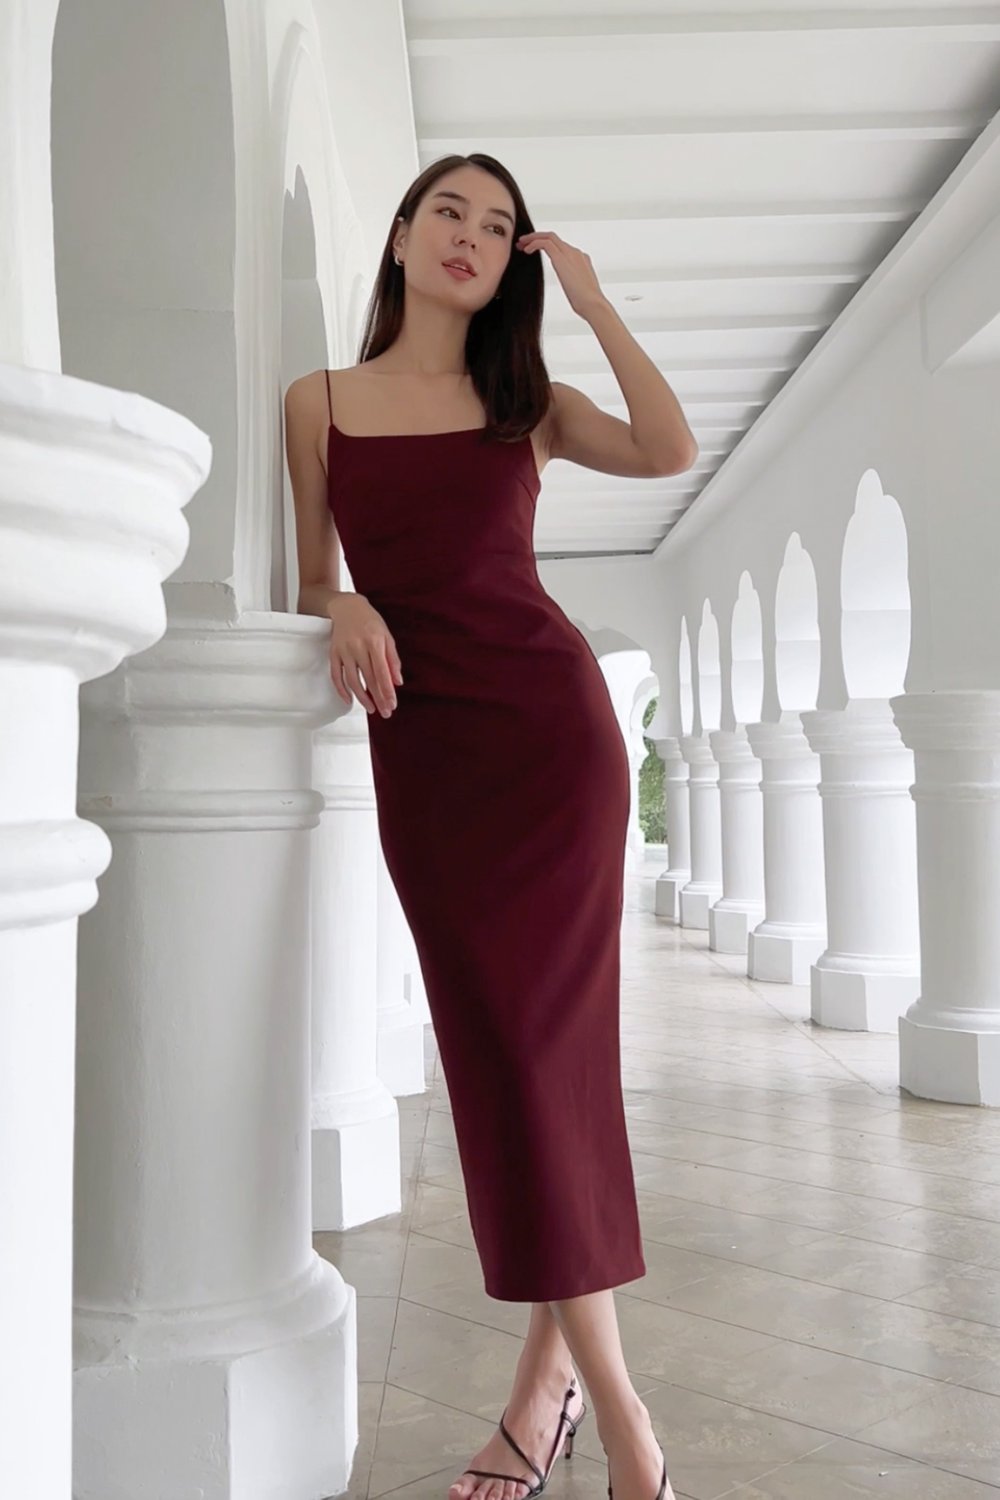 MONROE PADDED RUCHED BODYCON MIDAXI DRESS (WINE) | Lovet